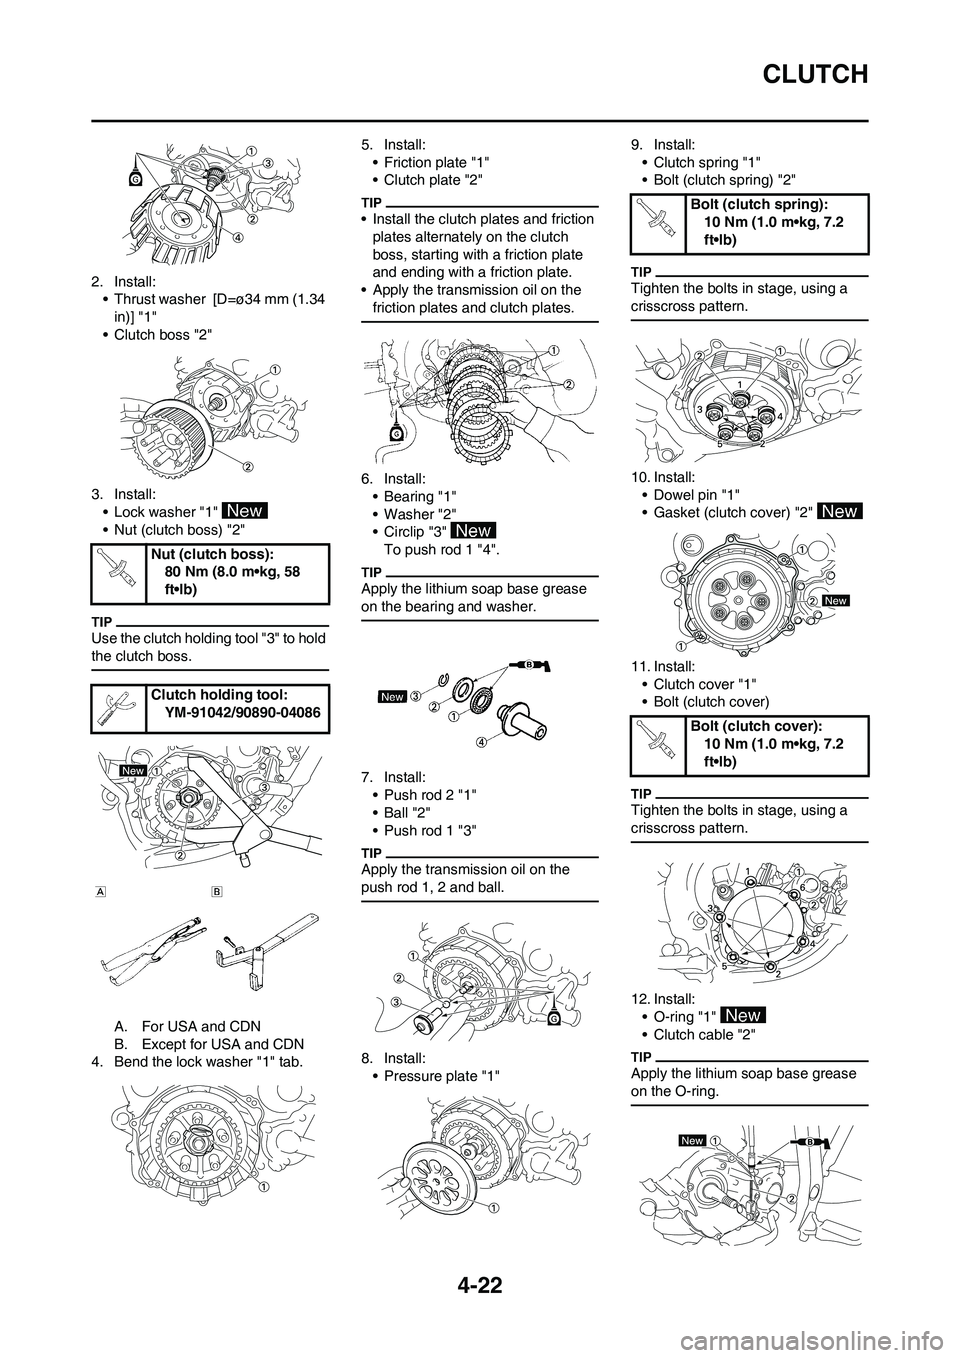 YAMAHA YZ125LC 2011  Owners Manual 4-22
CLUTCH
2. Install:
• Thrust washer  [D=ø34 mm (1.34 
in)] "1" 
• Clutch boss "2"
3. Install:
• Lock washer "1" 
• Nut (clutch boss) "2"
Use the clutch holding tool "3" to hold 
the clutc